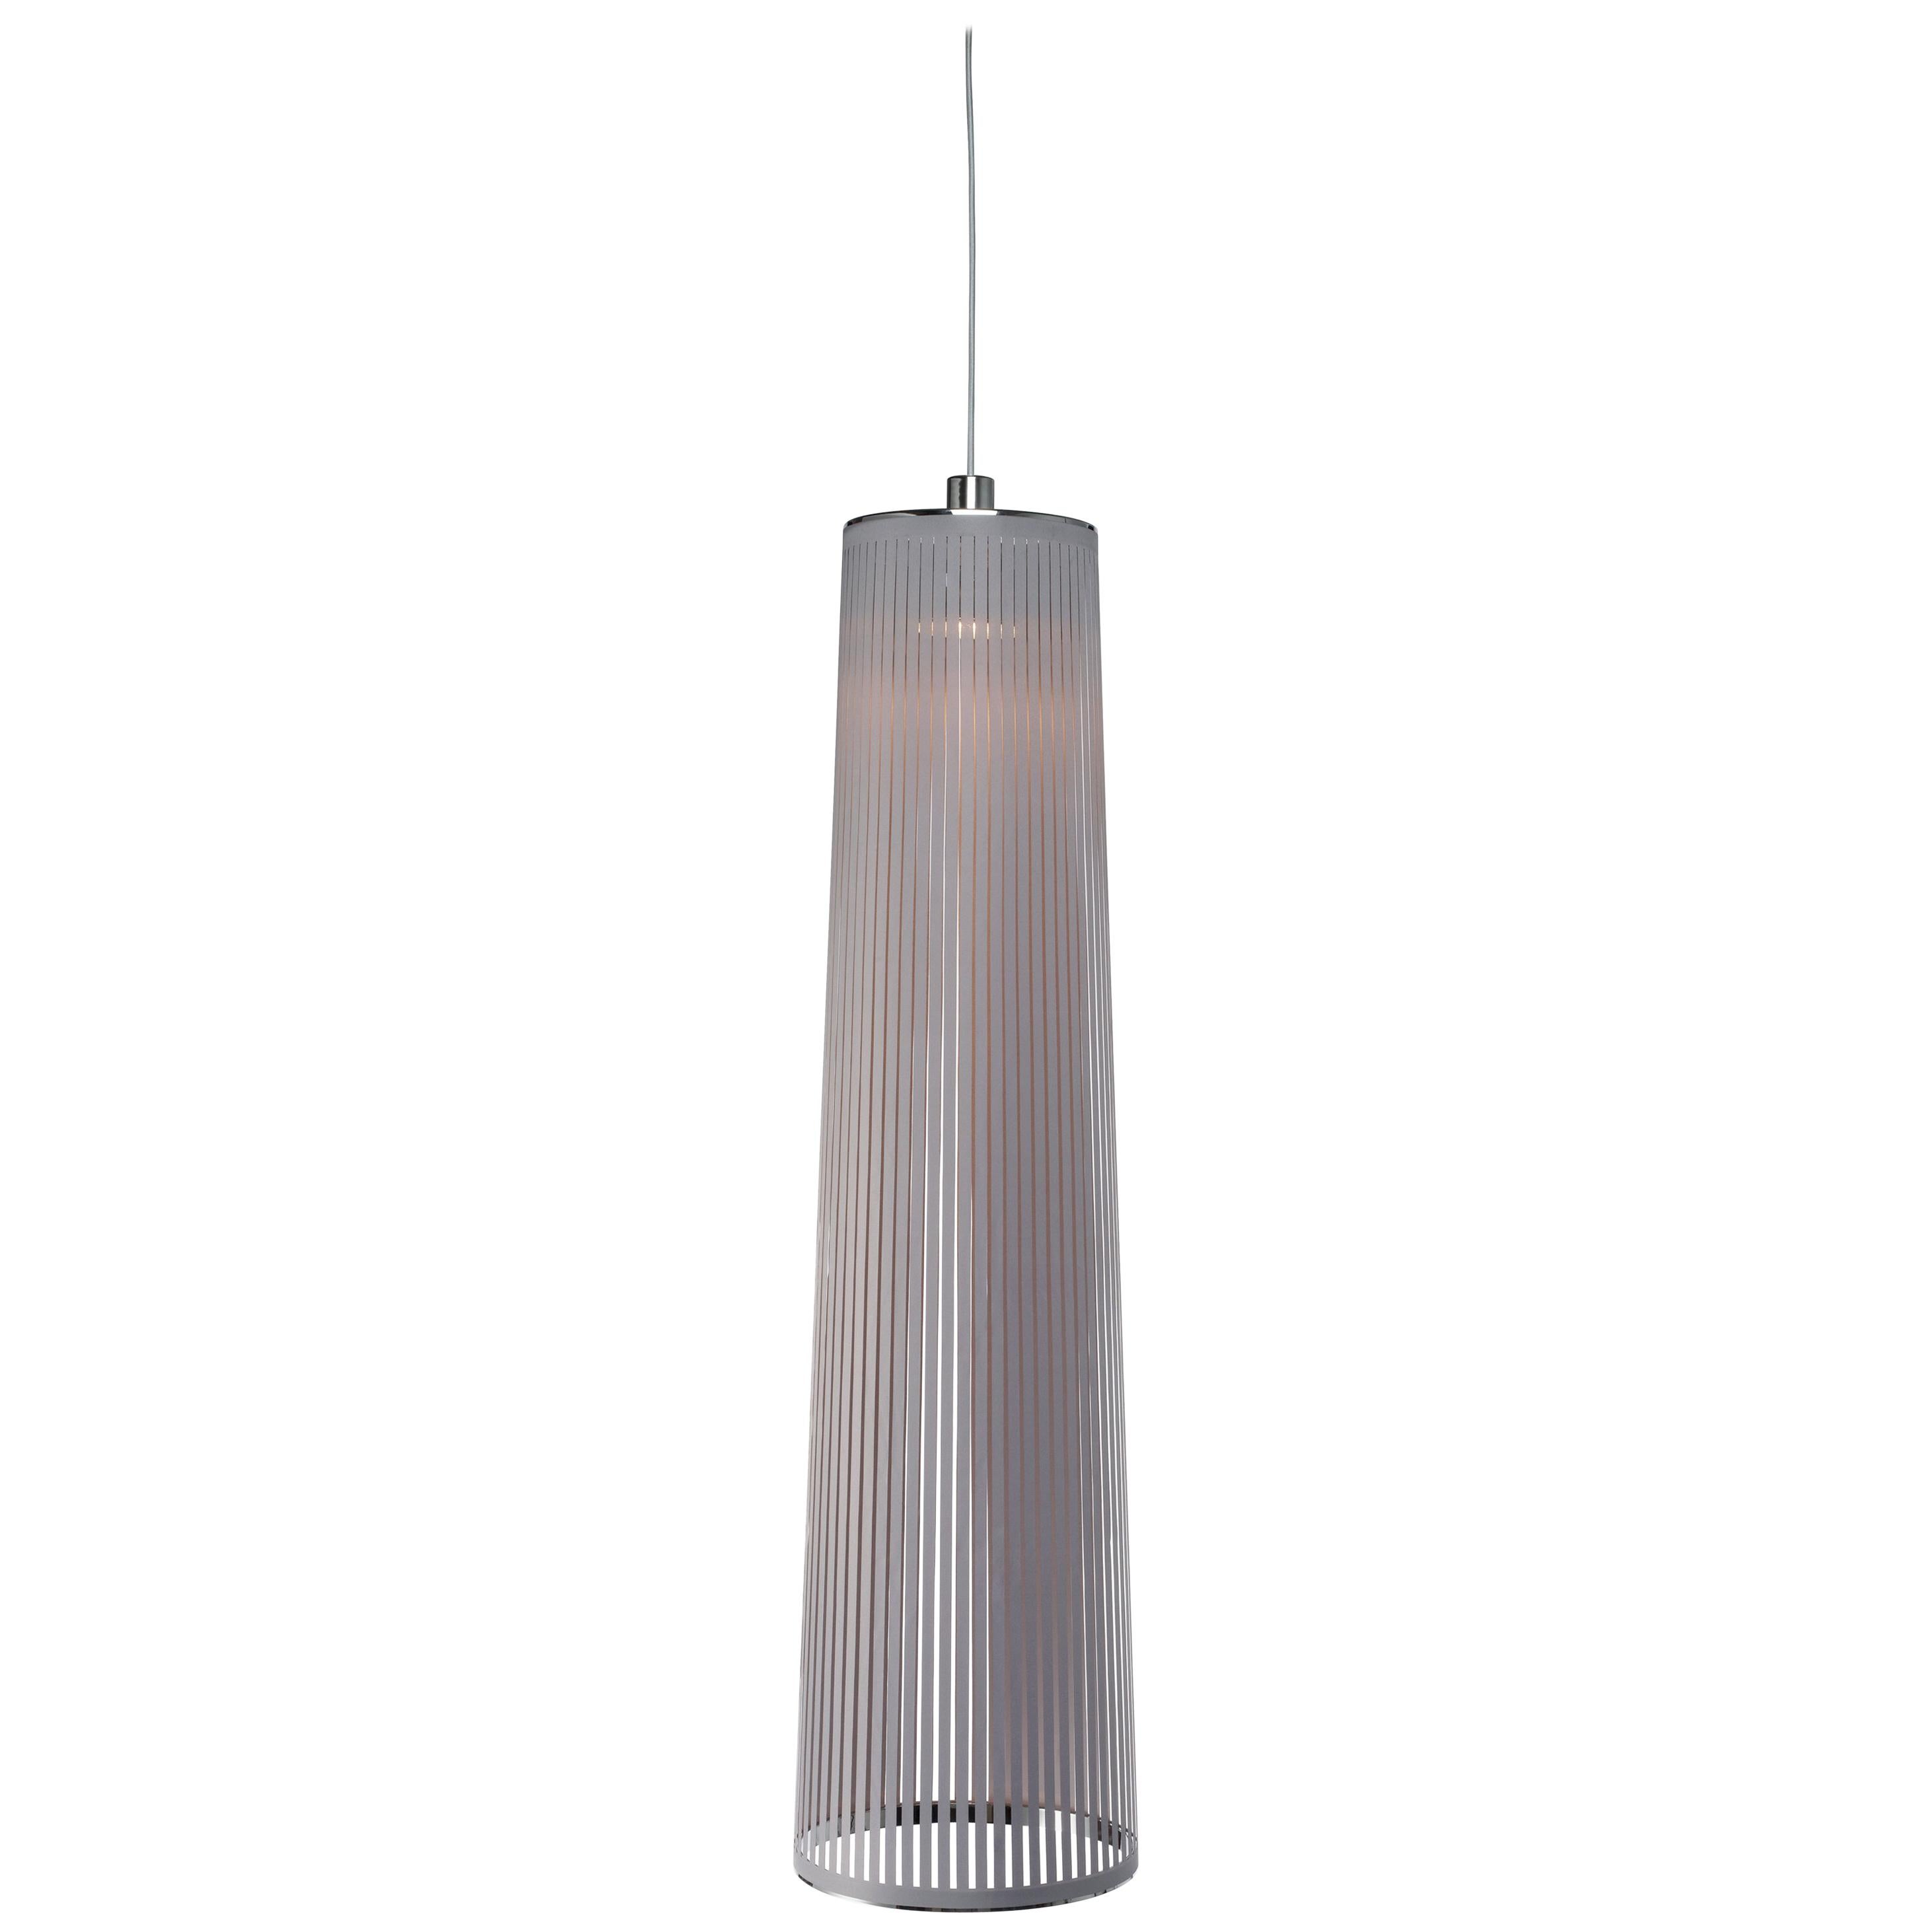 Solis 48 Pendant Light in Silver by Pablo Designs